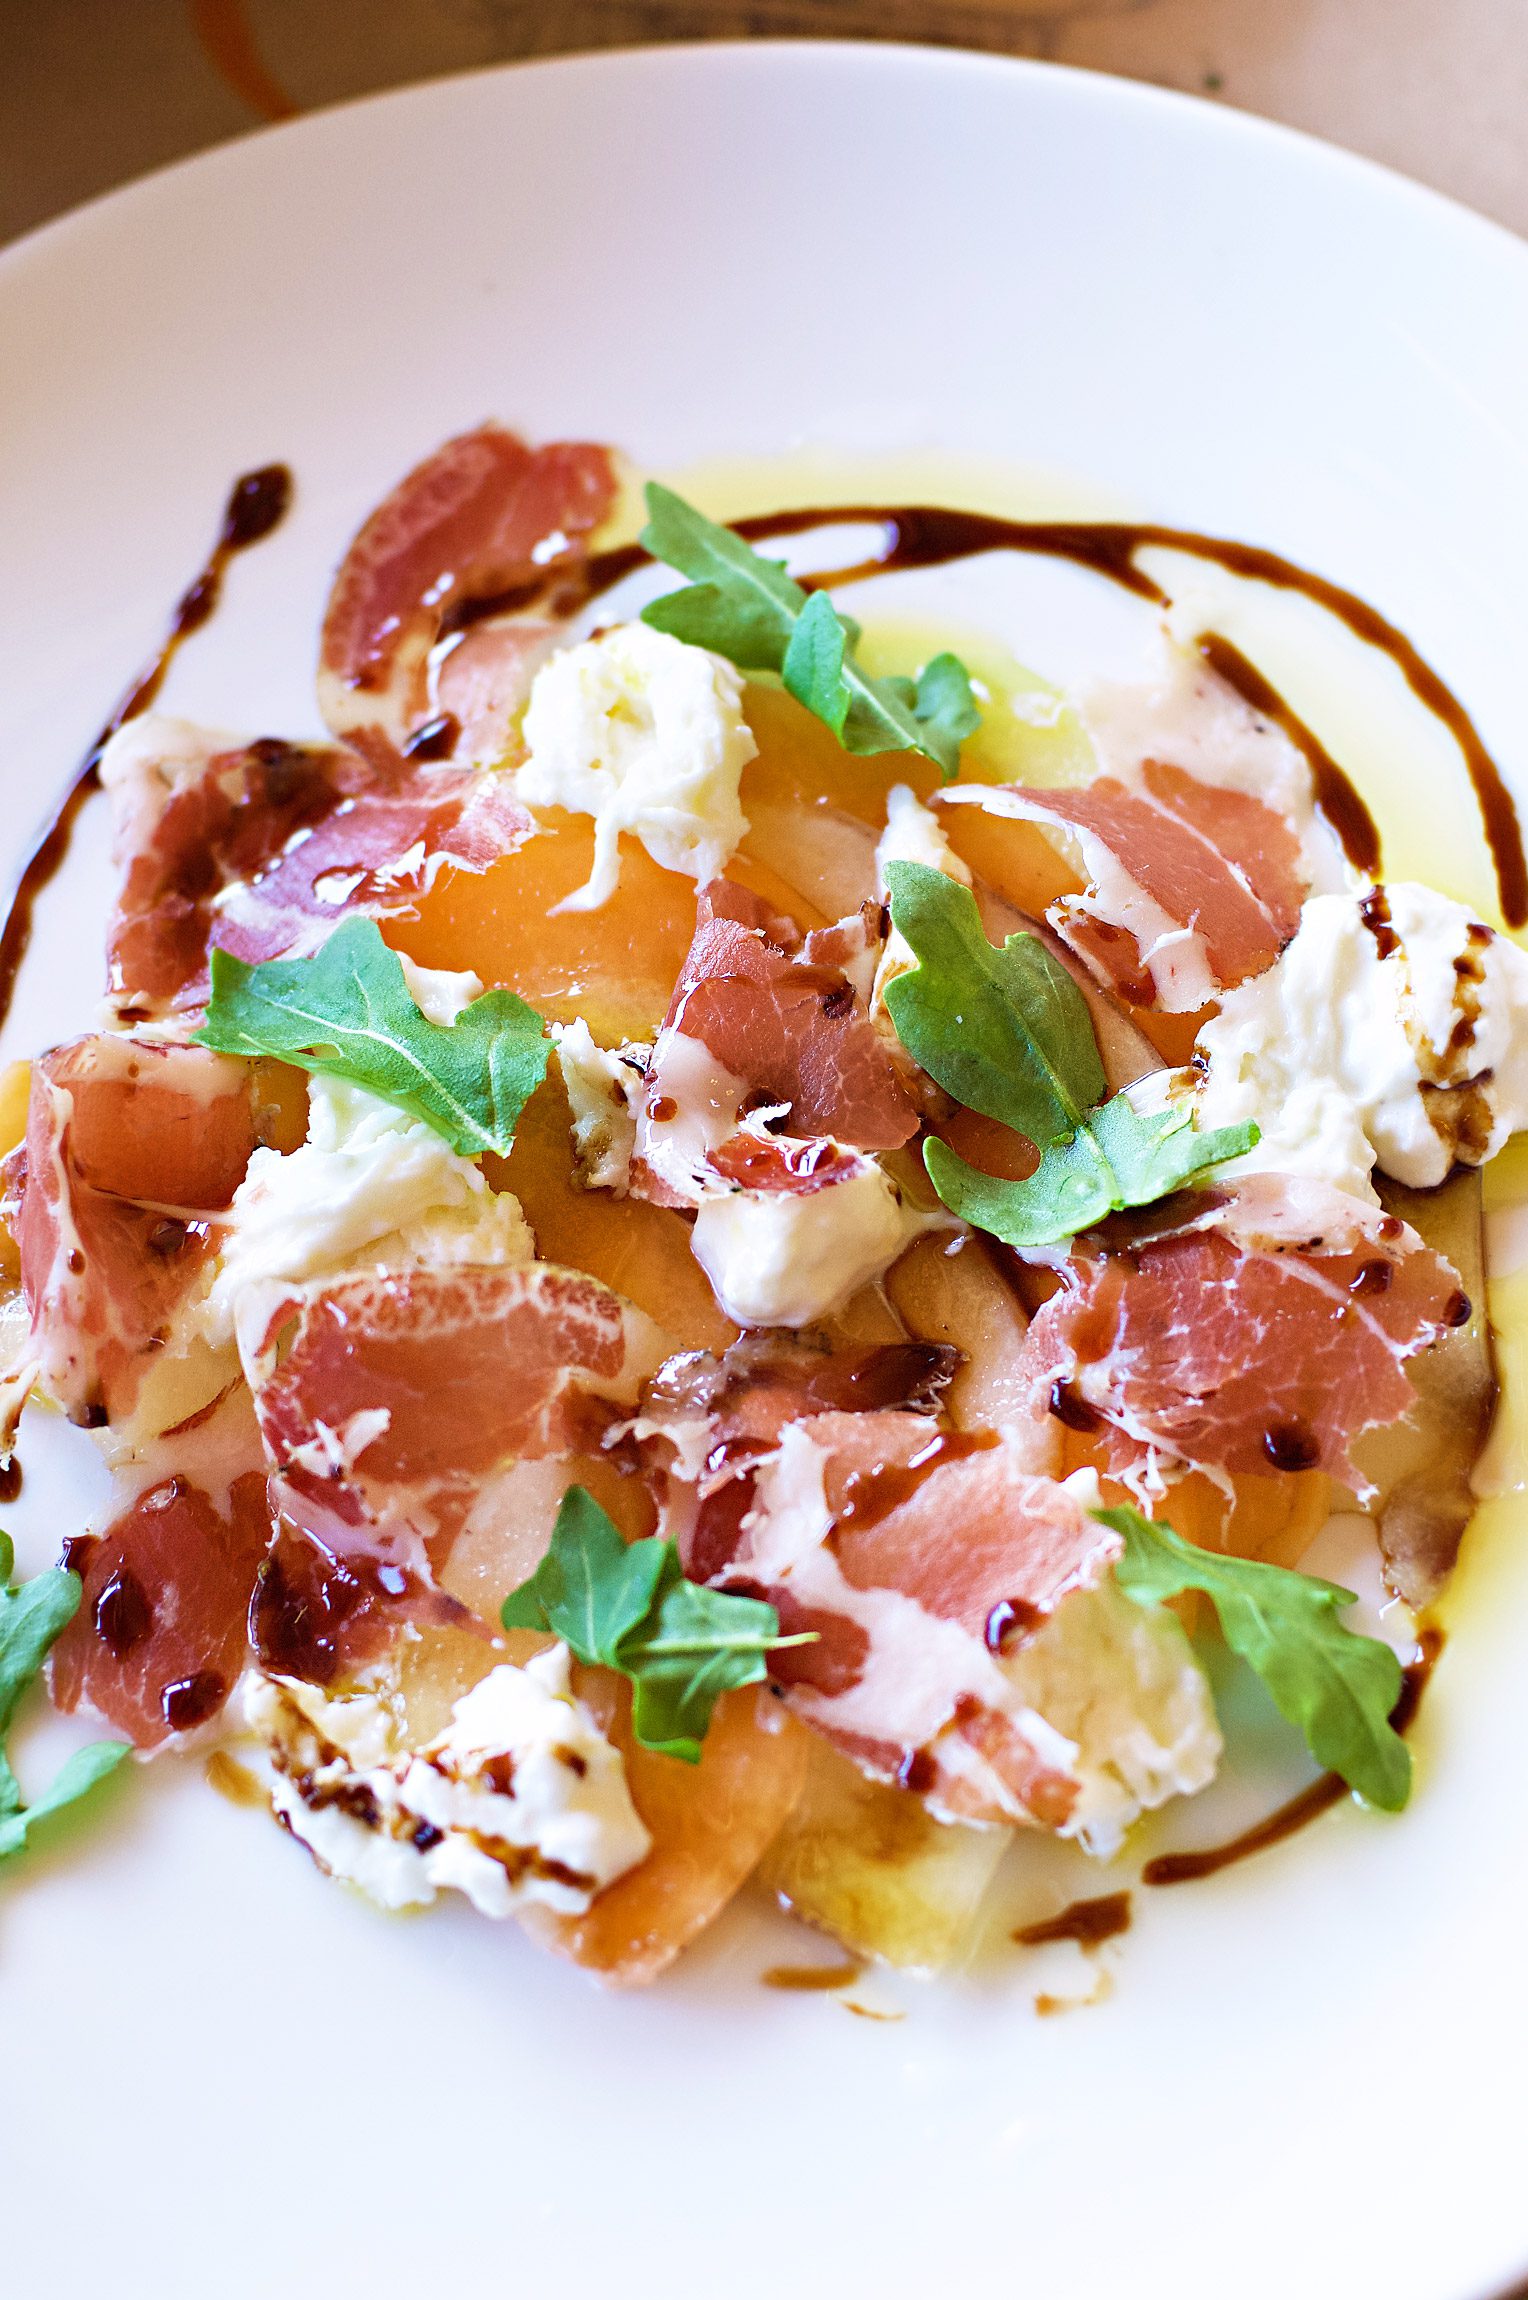 Burrata-Coppa-and-Cantaloupe-Salad-at-The-Girl-and-The-Fig-restaurant-in-Sonoma-California-photography-by-Monica-Schwartz